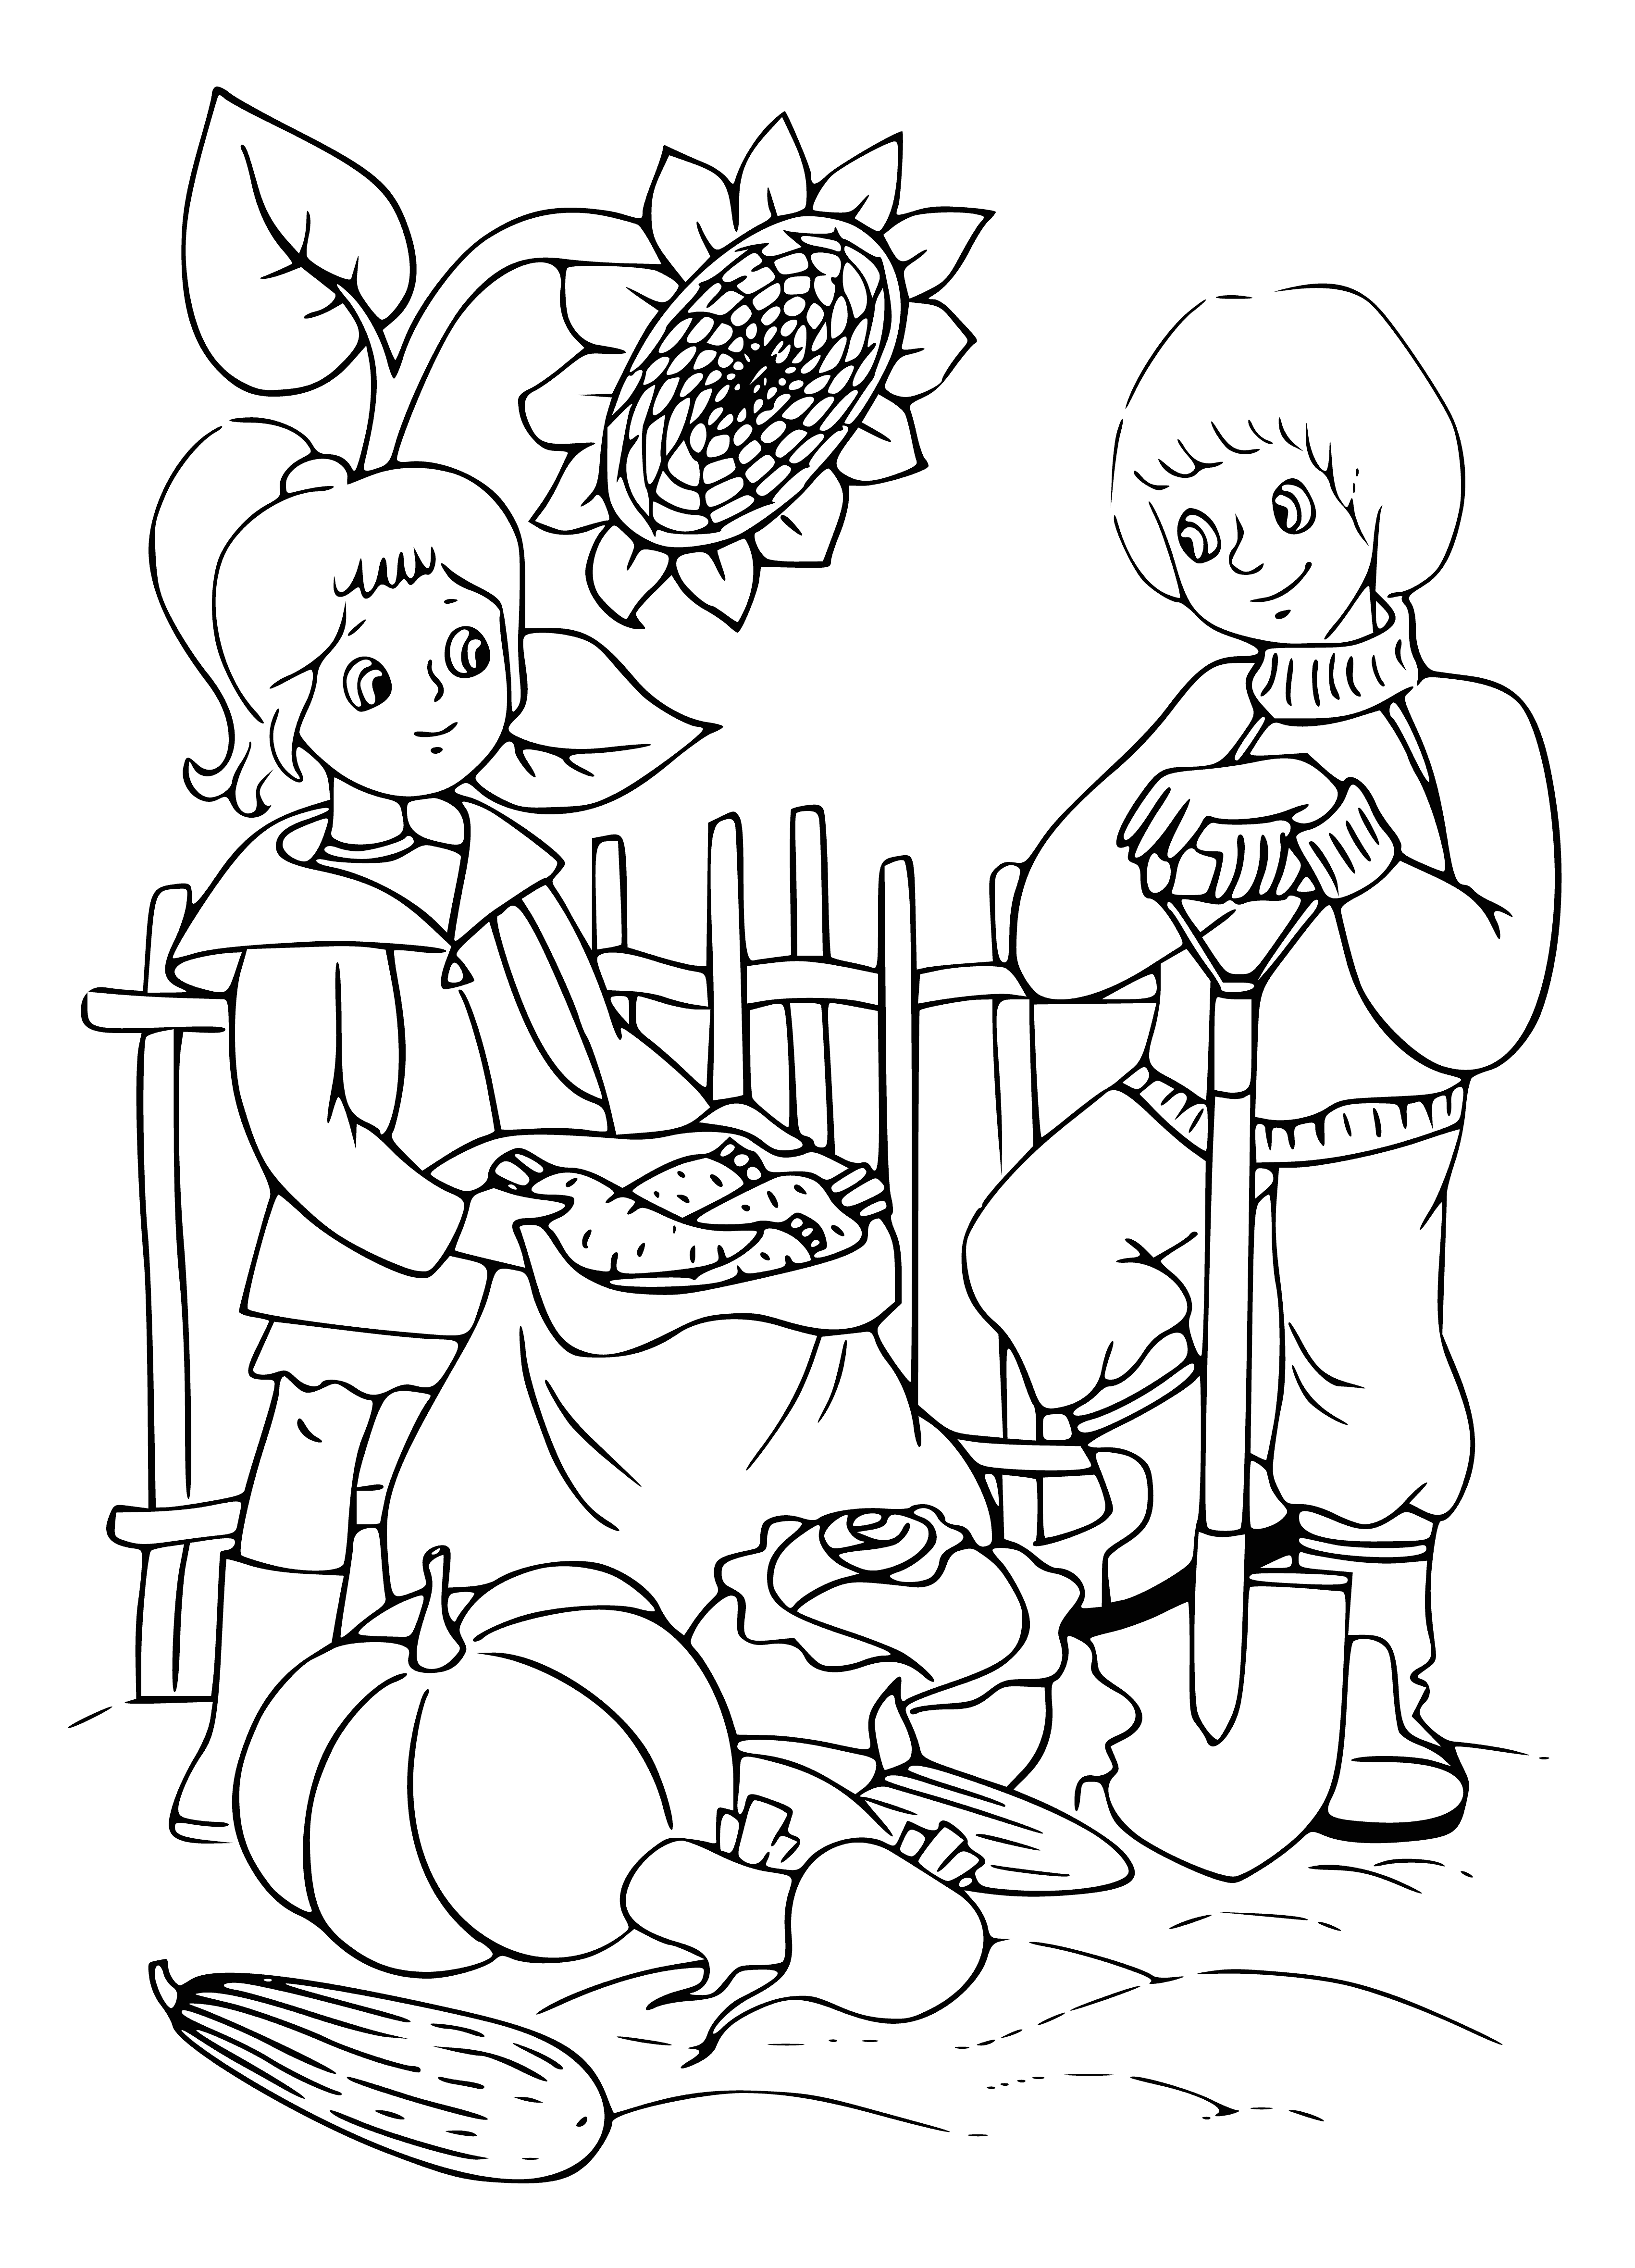 coloring page: 6 veg. in a coloring page - pumpkin, corn, carrot, turnip, onion, & potato. Background is orange, yellow, & red, representing fall leaves.